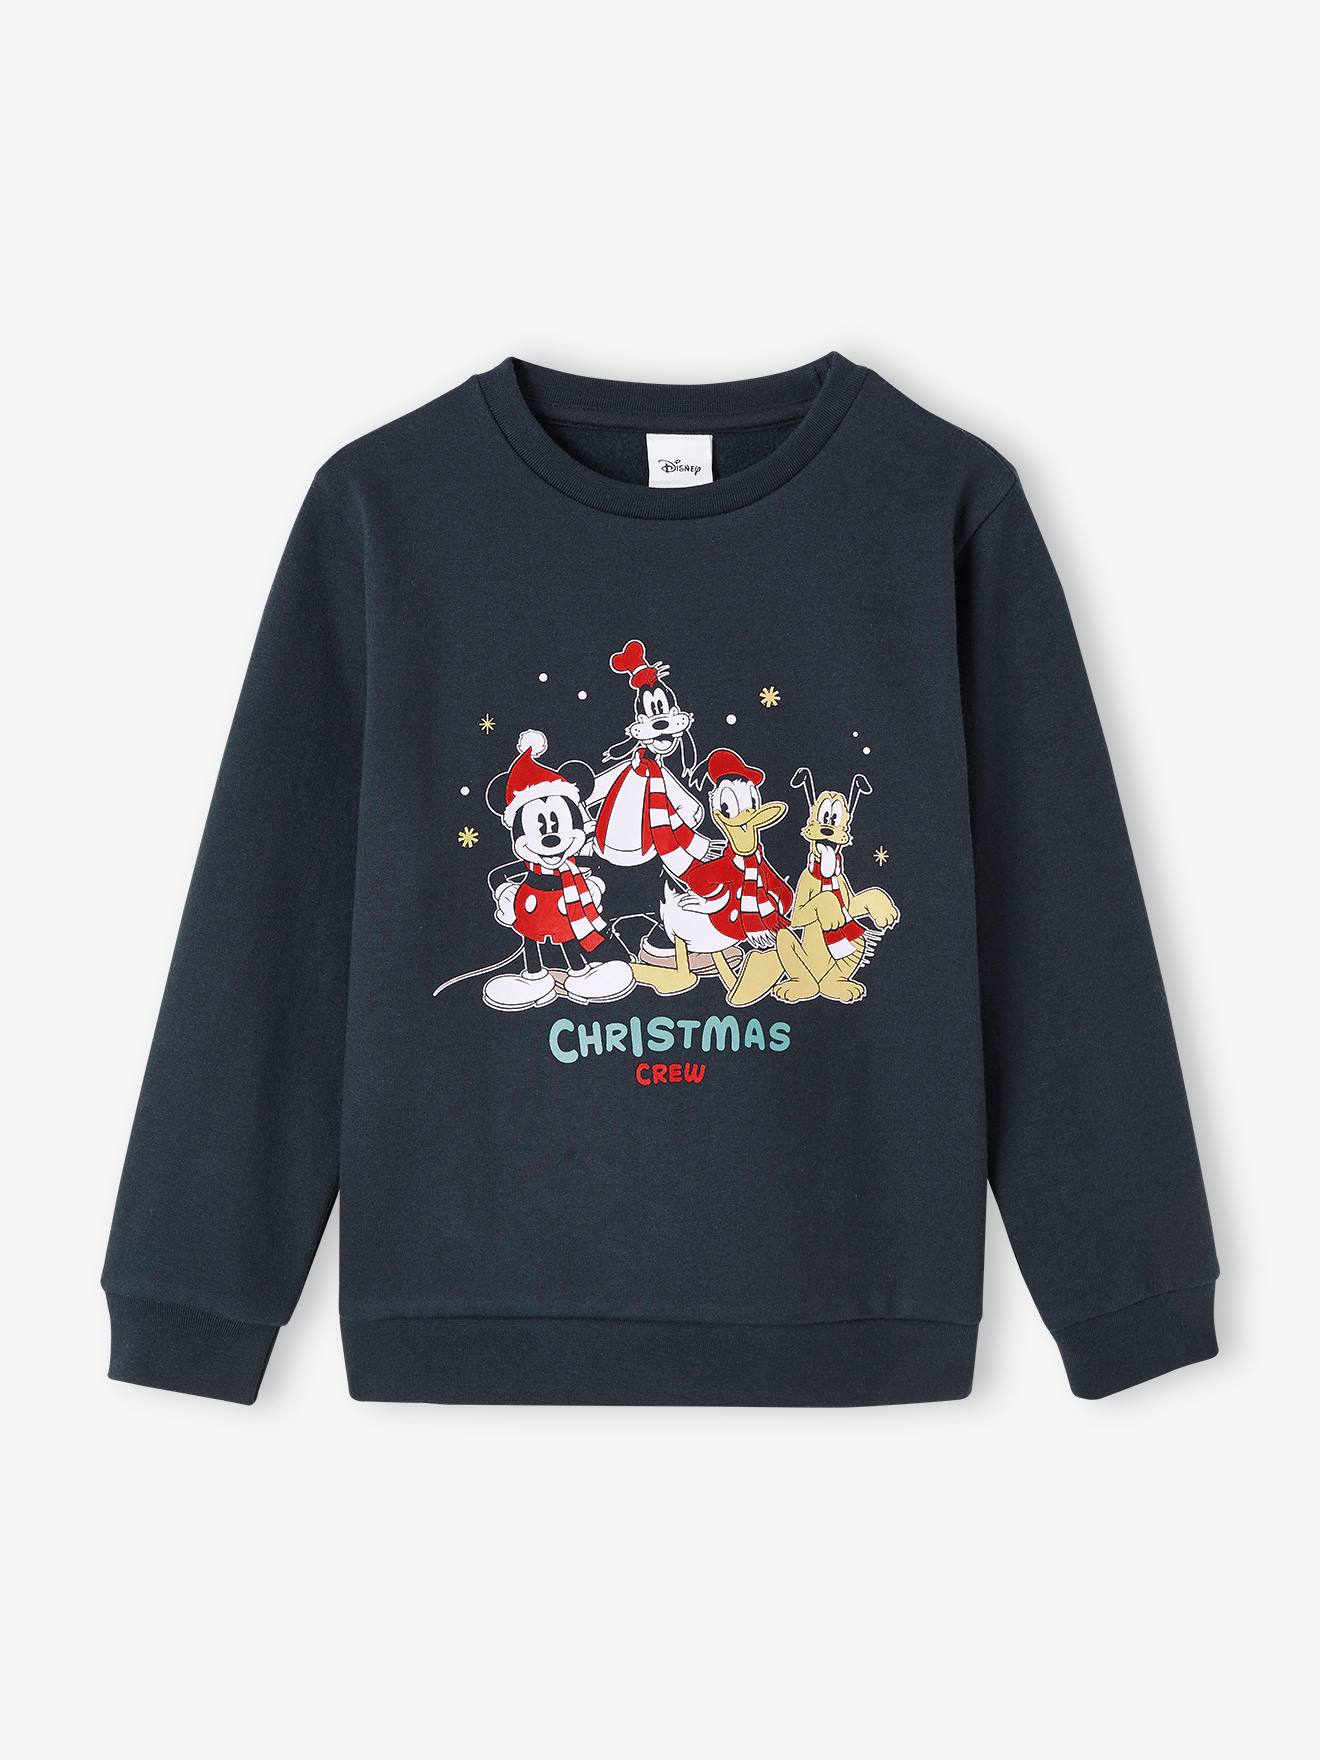 Christmas Special, Disney Mickey Mouse(r) Sweatshirt for Boys navy blue